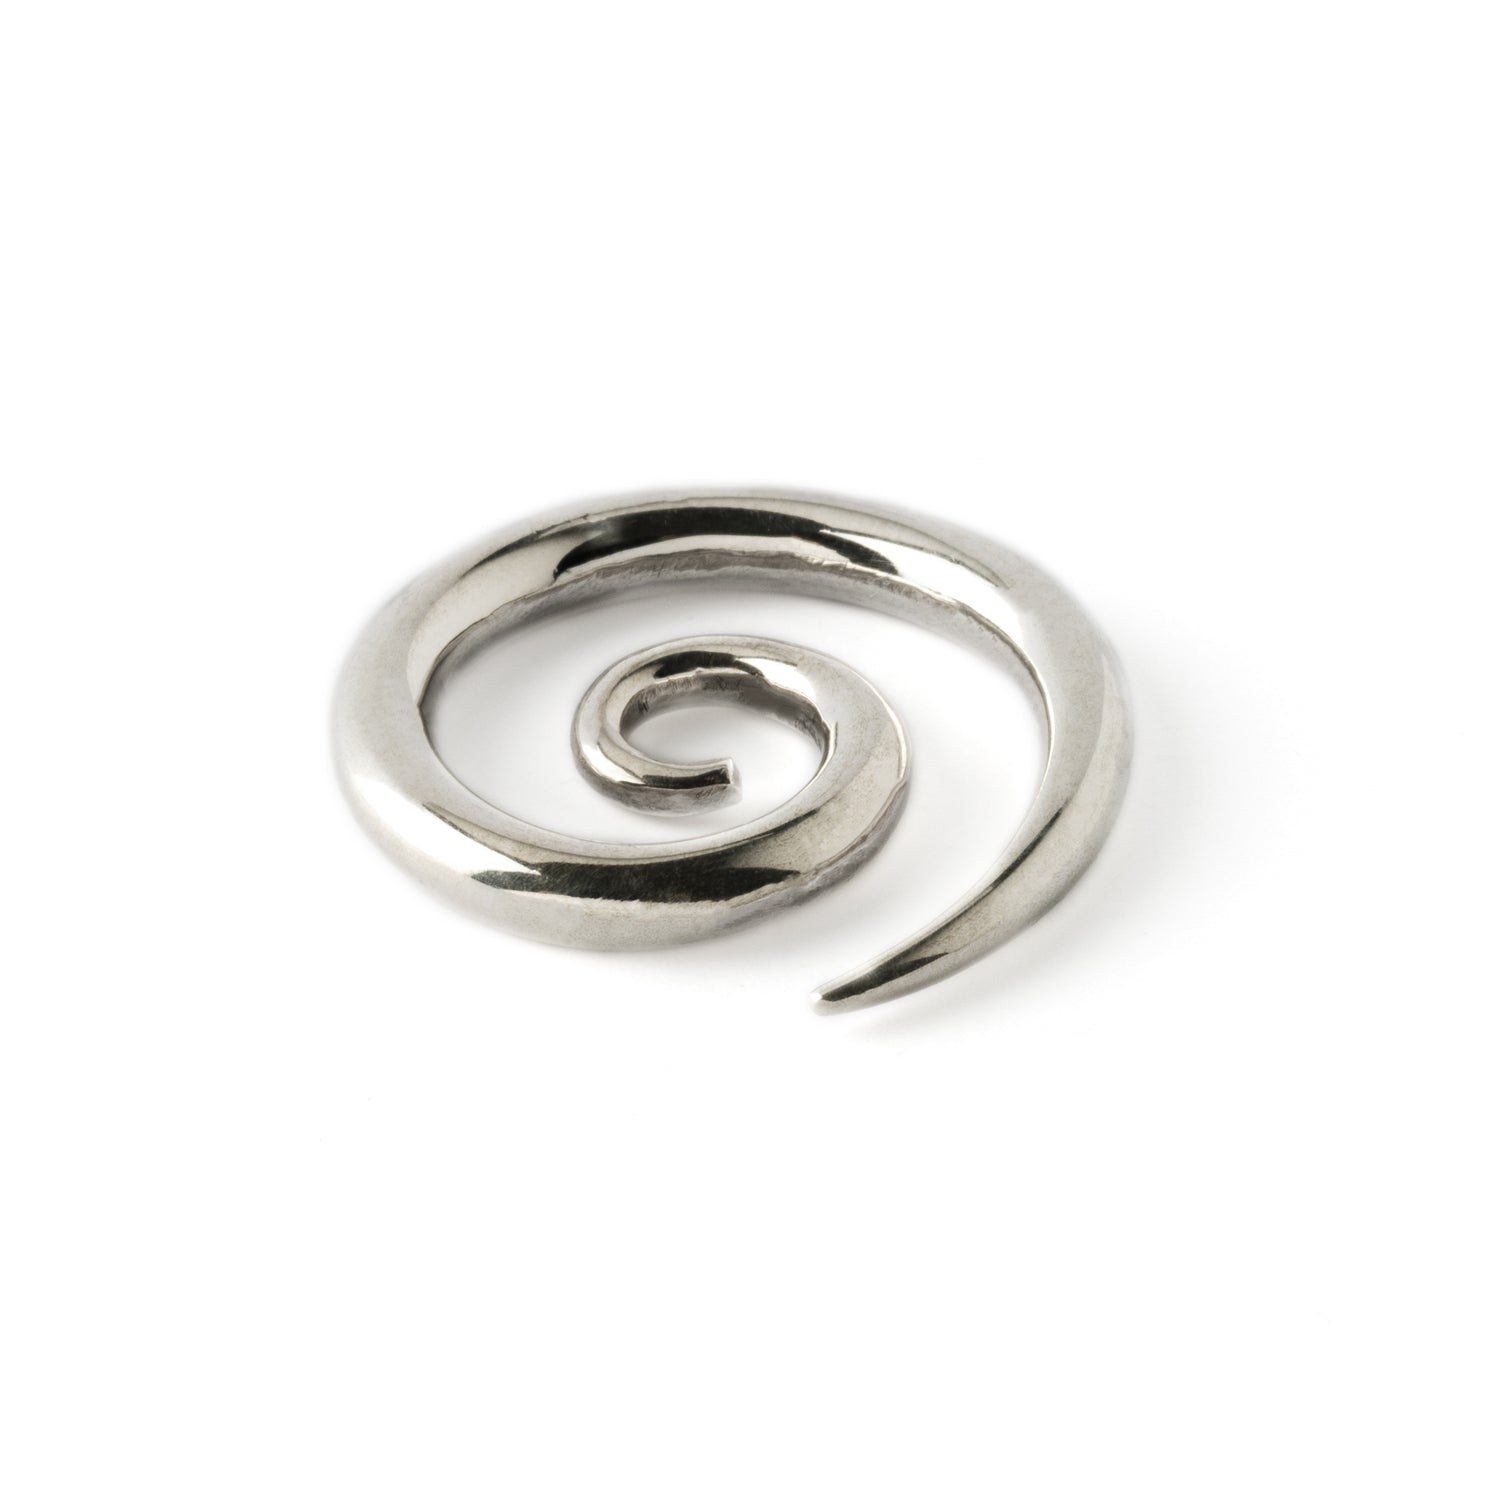 single silver spiral gauge earring front view